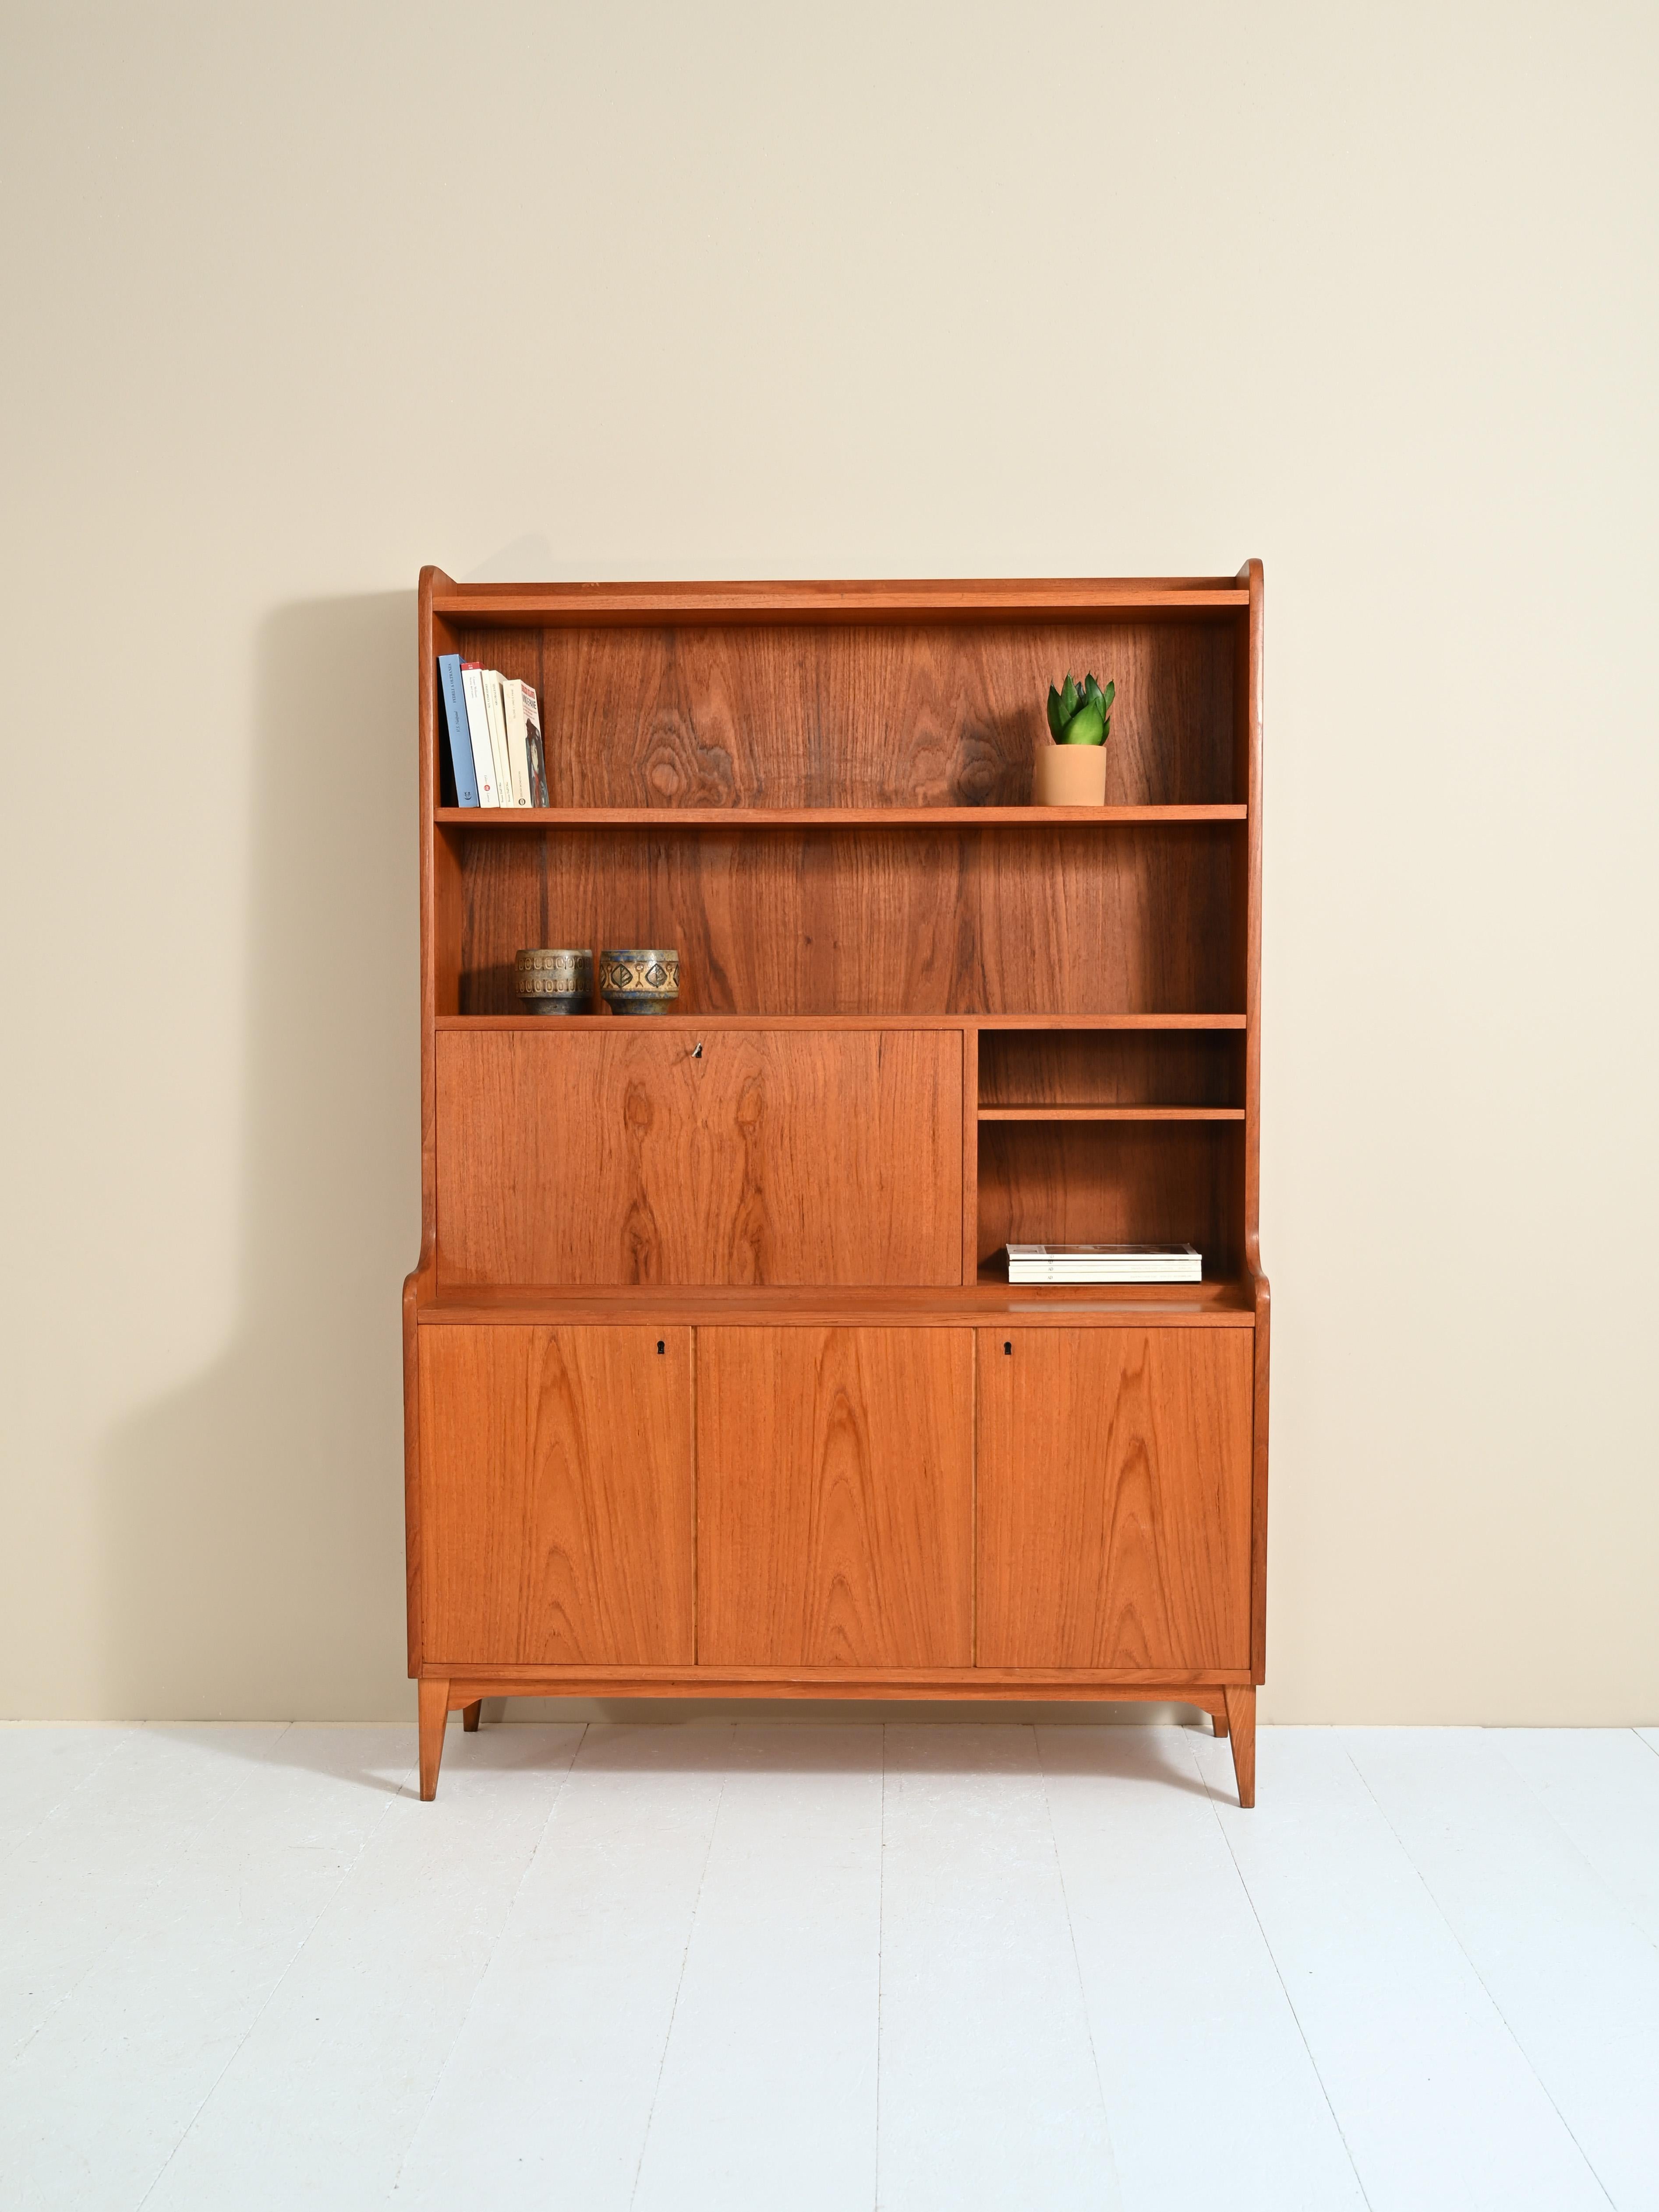 Original teak cabinet from the 1960s.
At the top there is shelving and a drop-down top that converts to a convenient writing desk when needed.
In the lower part the three hinged doors enclose a storage compartment equipped with a shelf on one side